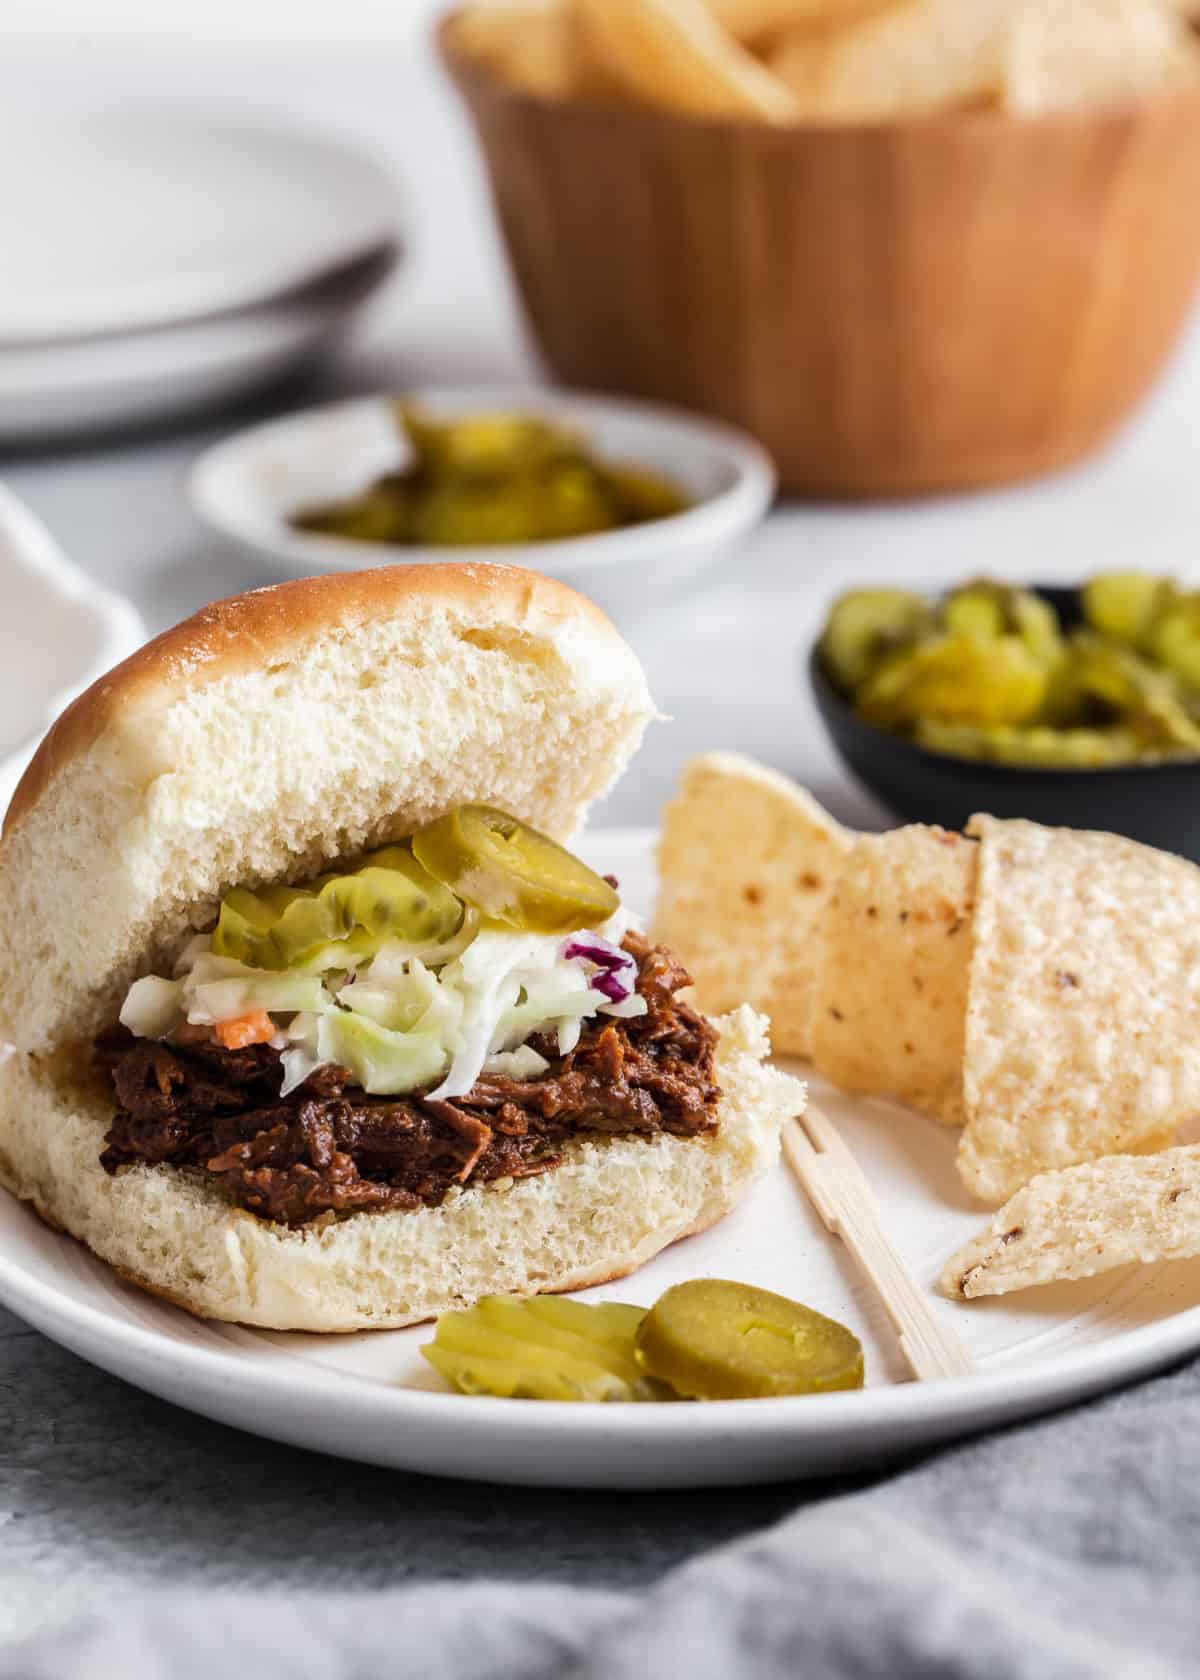 bbq beef and slaw in mini rolls on white plate with tortilla chips.